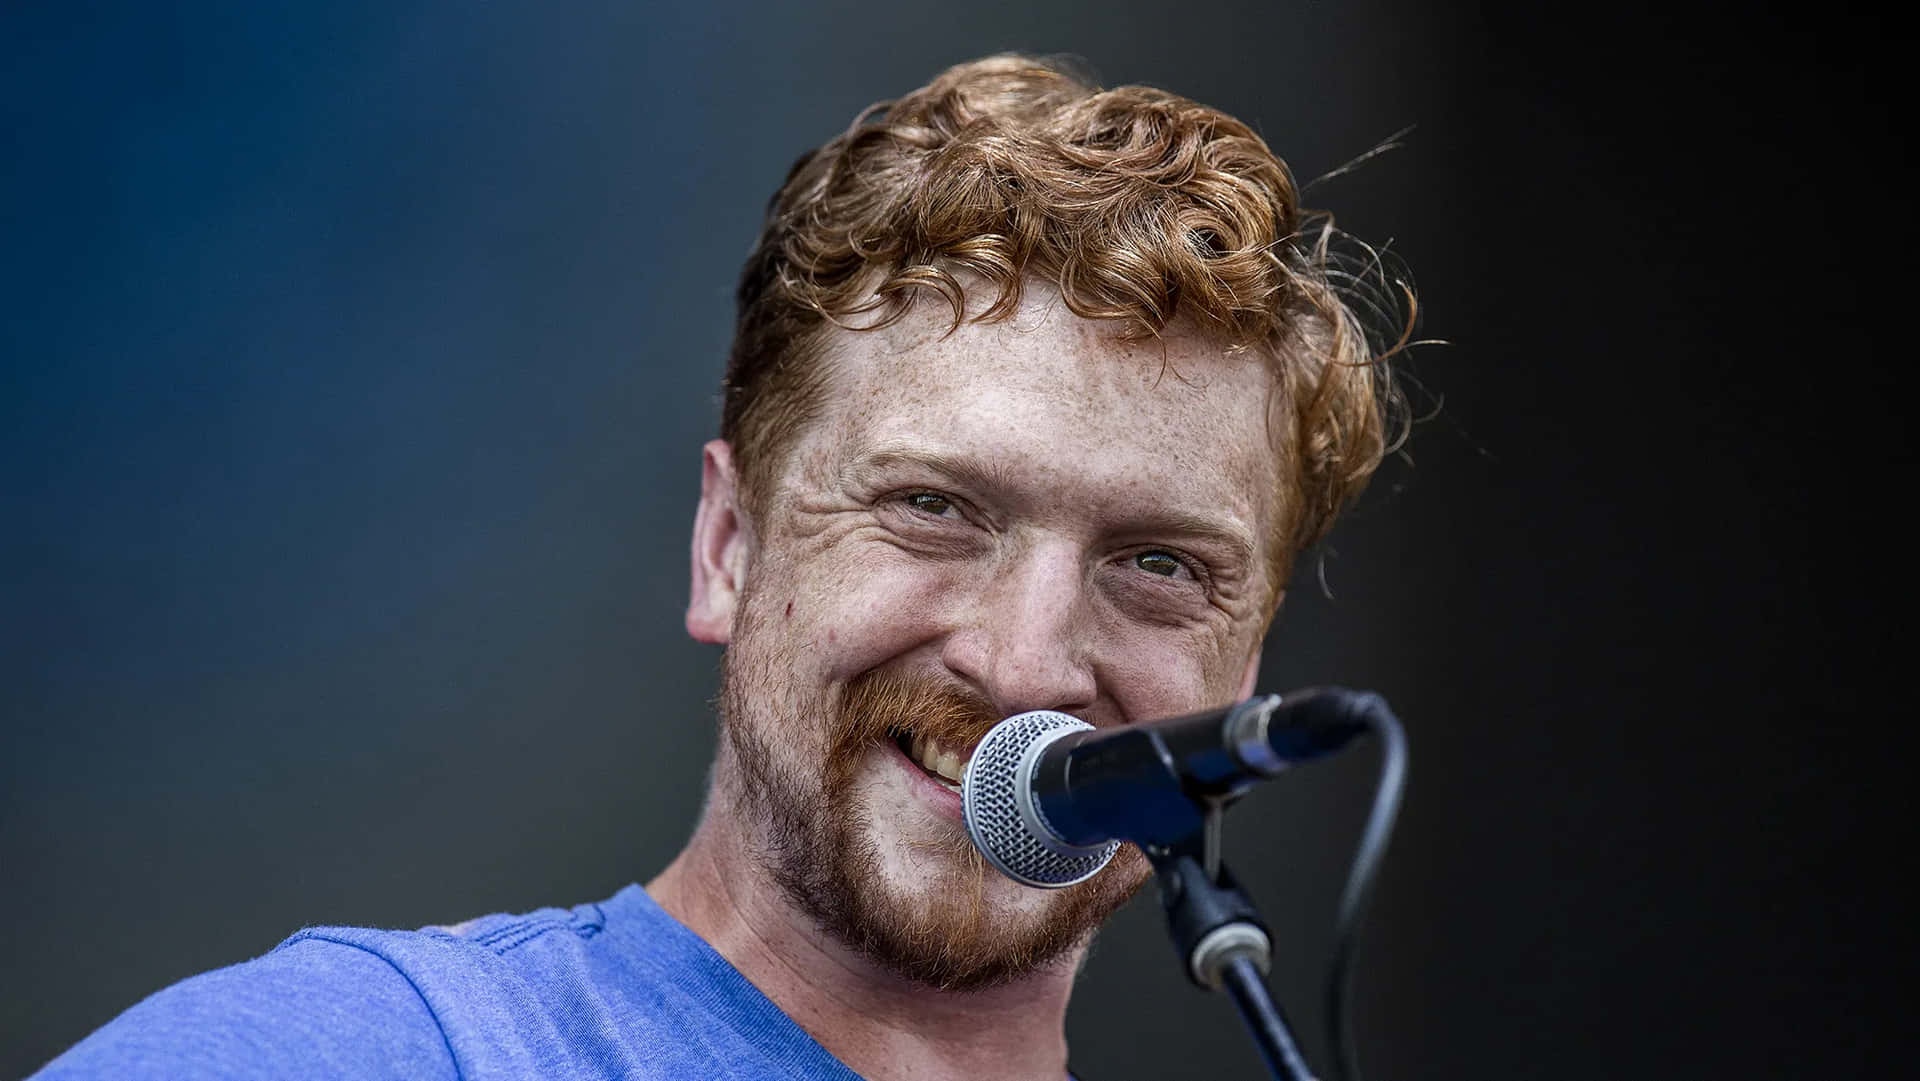 Red Haired Musician Performing Live Wallpaper